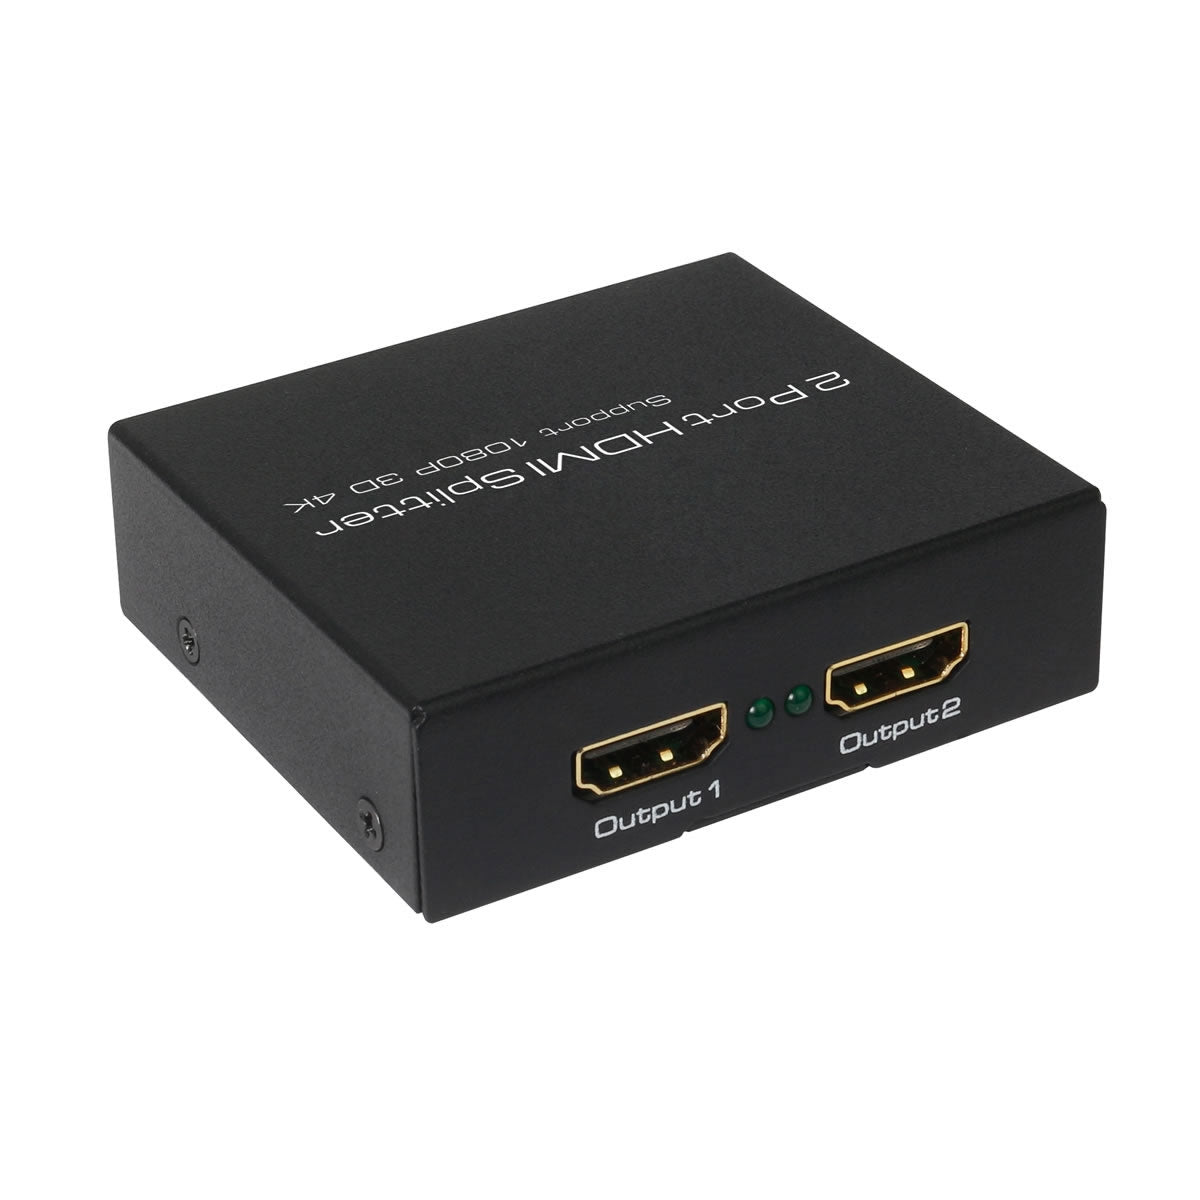 16-6802-4 HDMI 4K Splitter 1 In 2 Out, HDCP 1.4, Supports 3D, 4Kx2K@30Hz